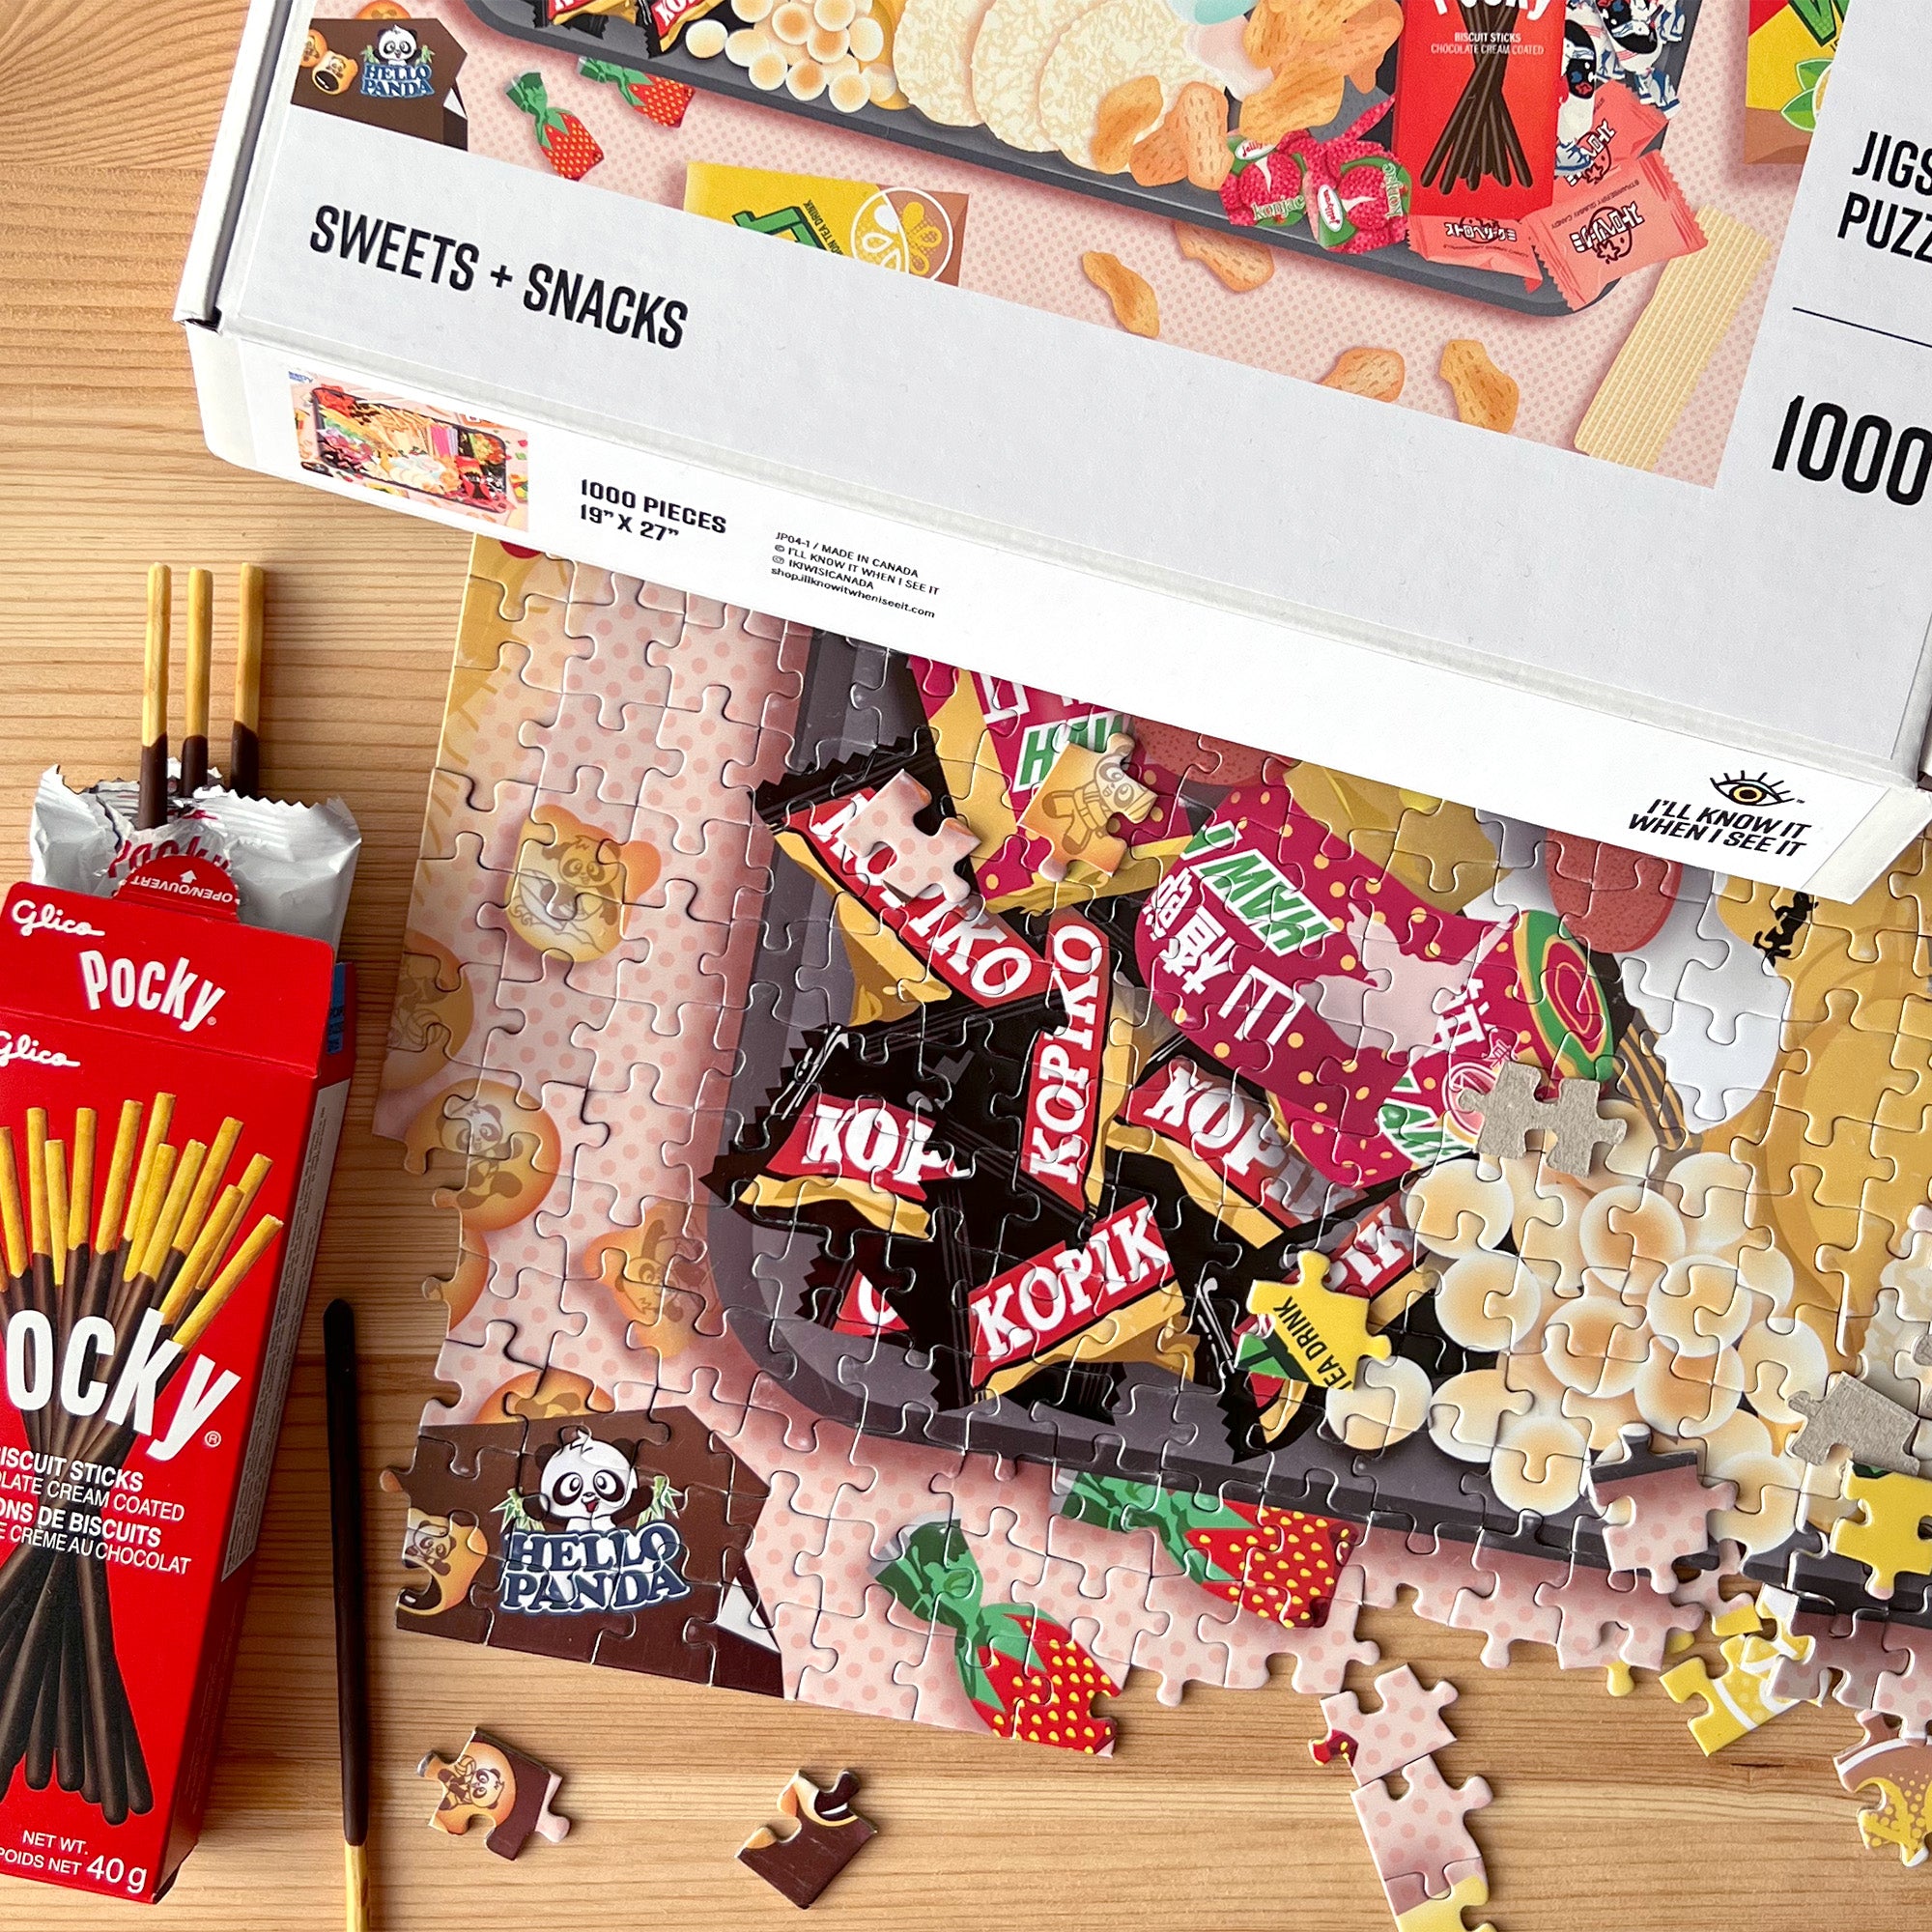 Asian sweets and snacks 1000 piece jigsaw puzzle by I'll Know It When I See it